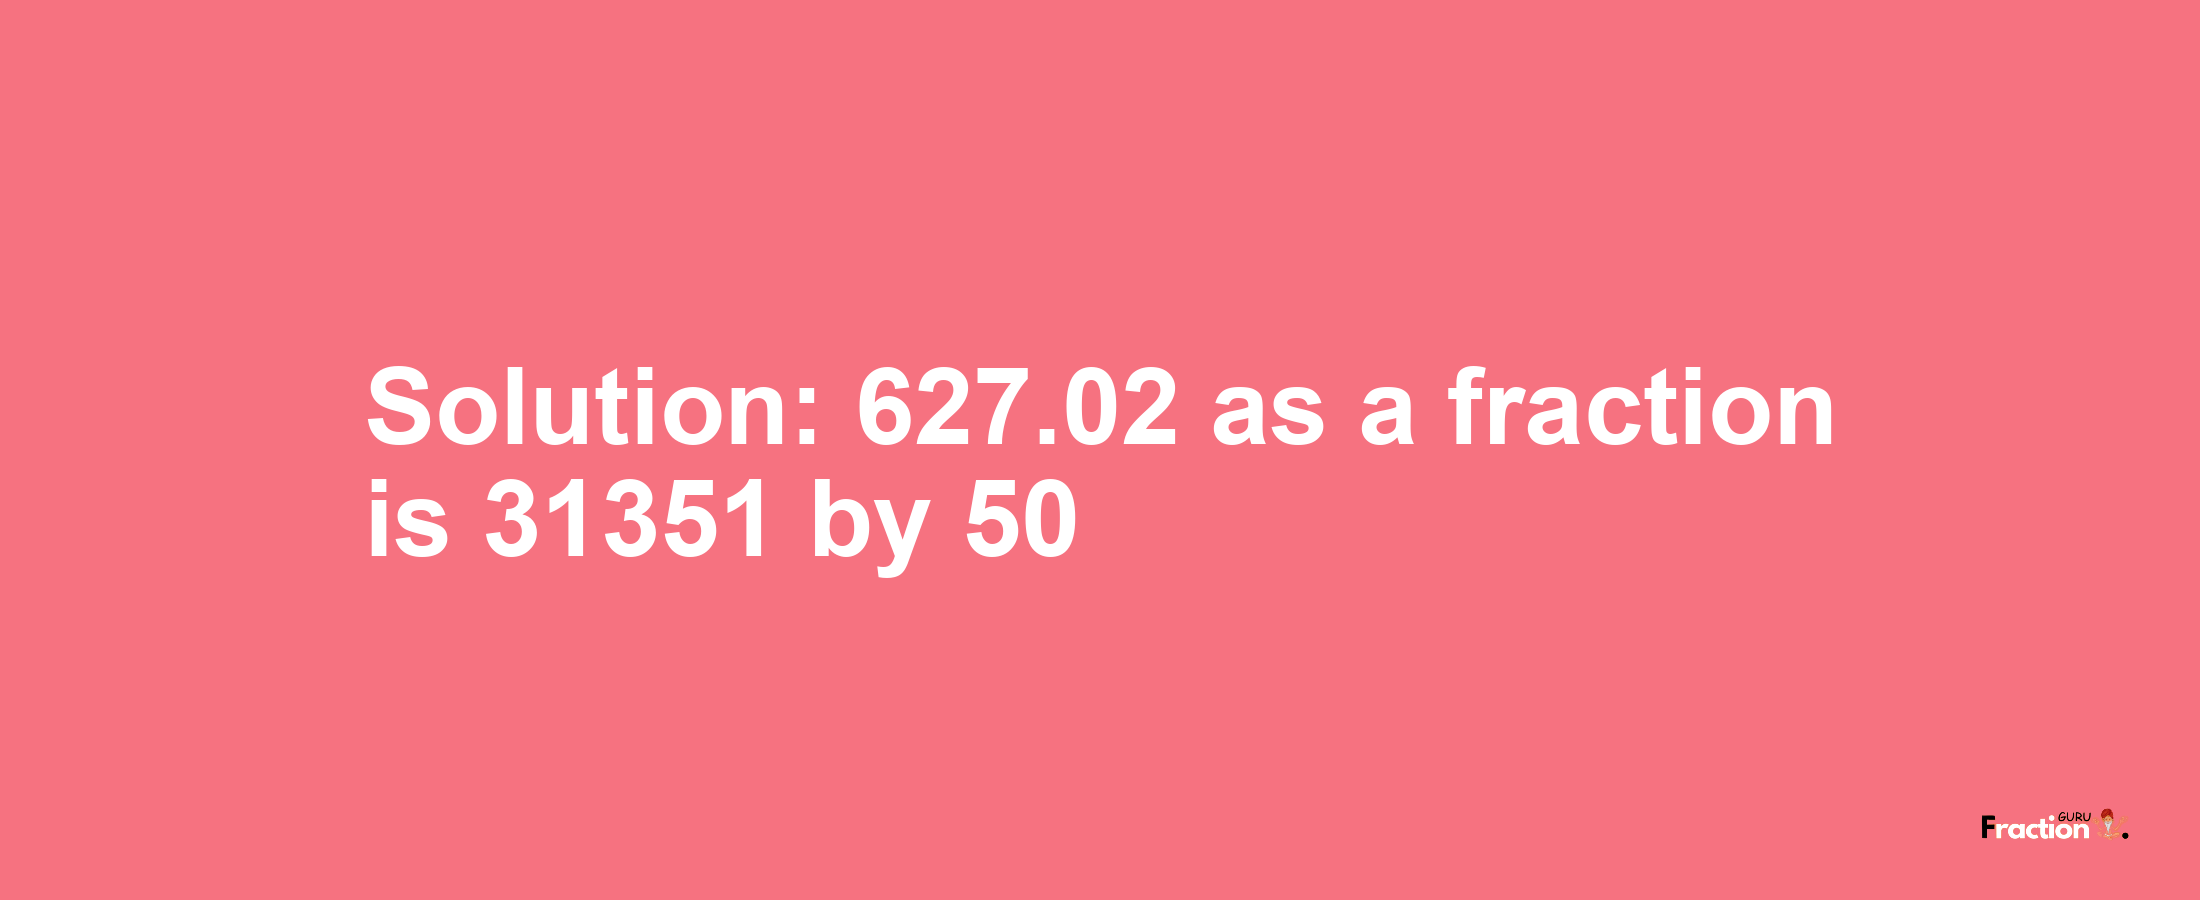 Solution:627.02 as a fraction is 31351/50